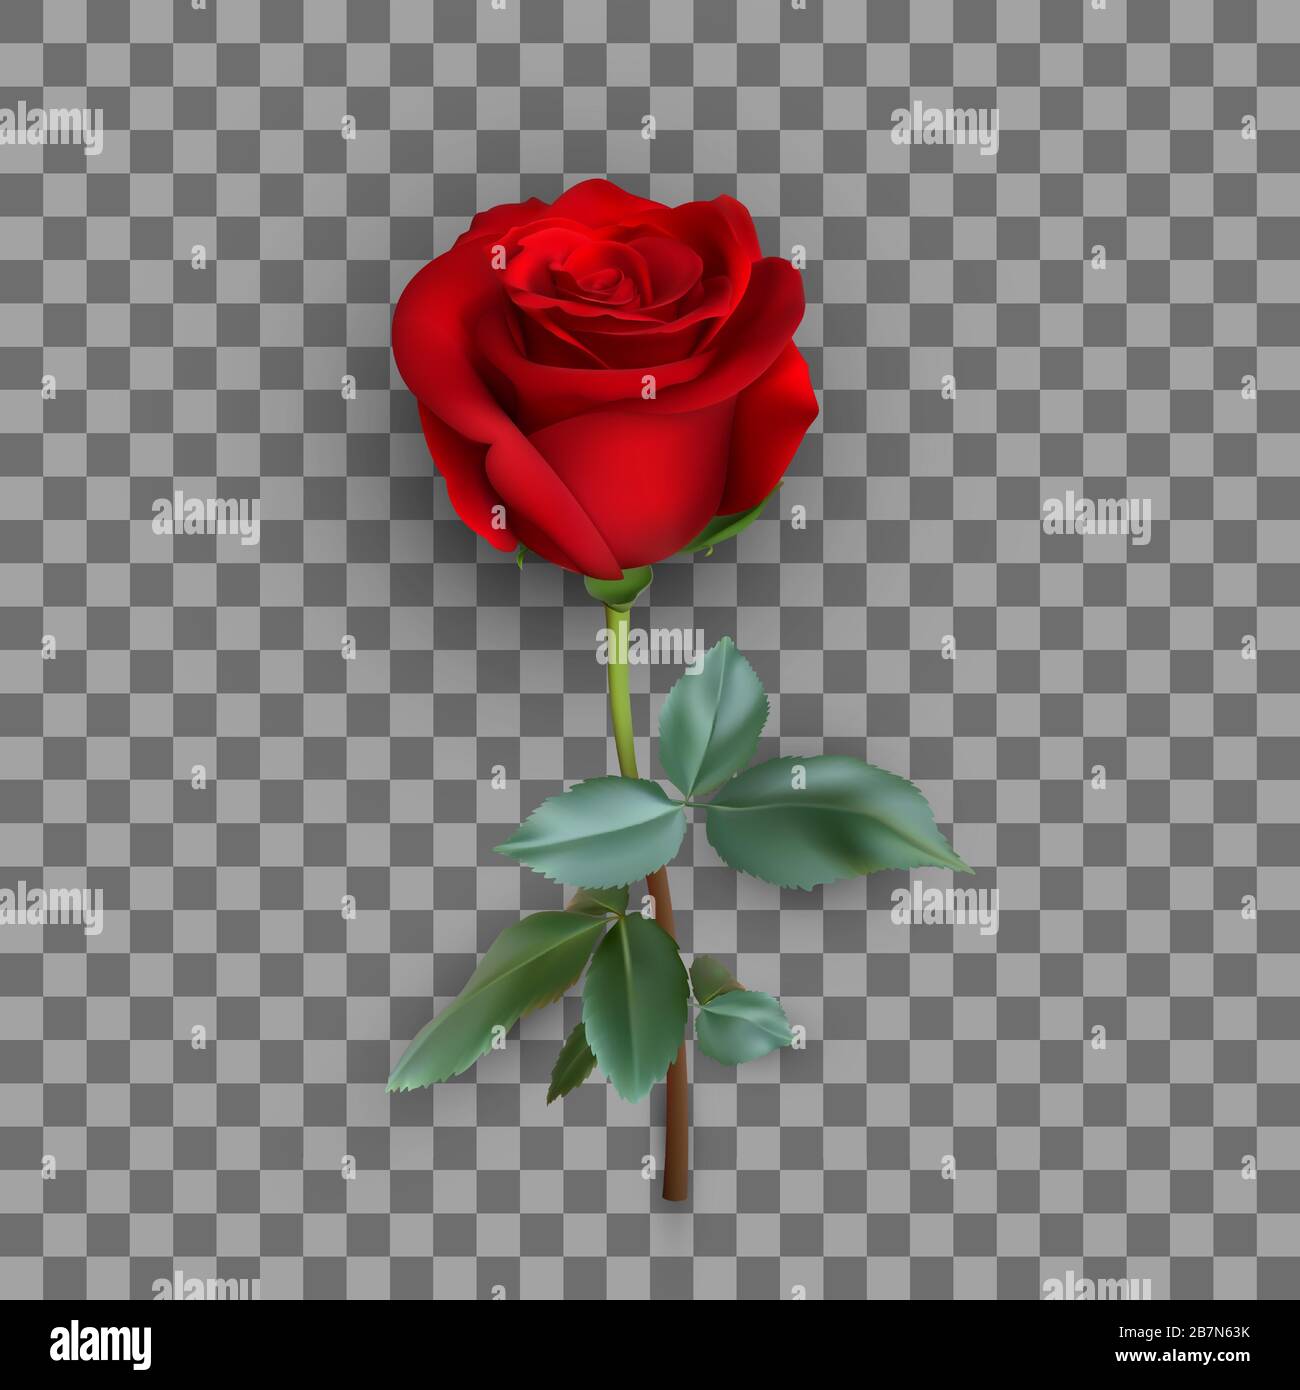 realistic rose design isolated on background, vector illustration Stock Vector